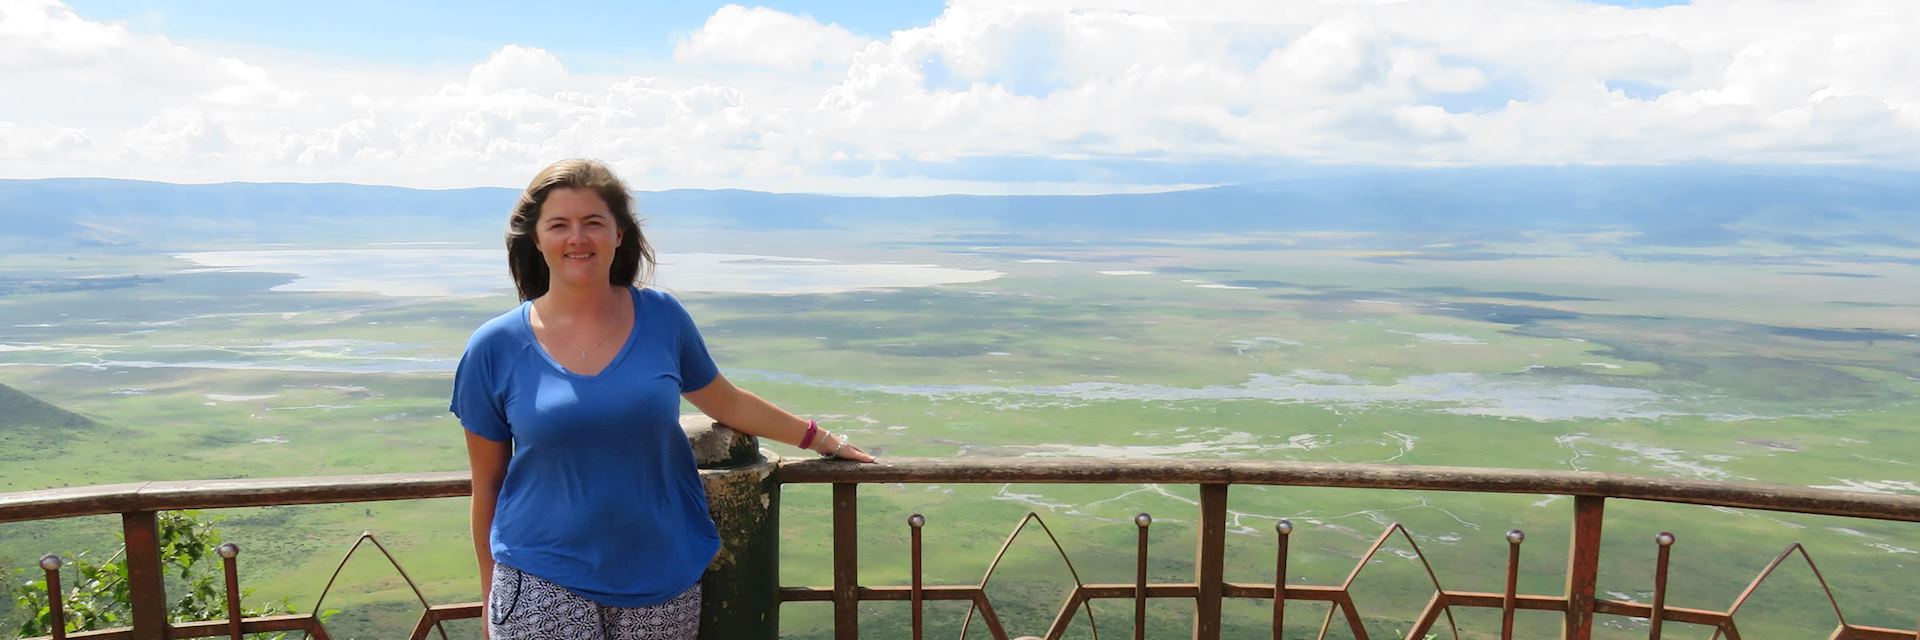 Emily at the Ngorongoro Crater viewing point